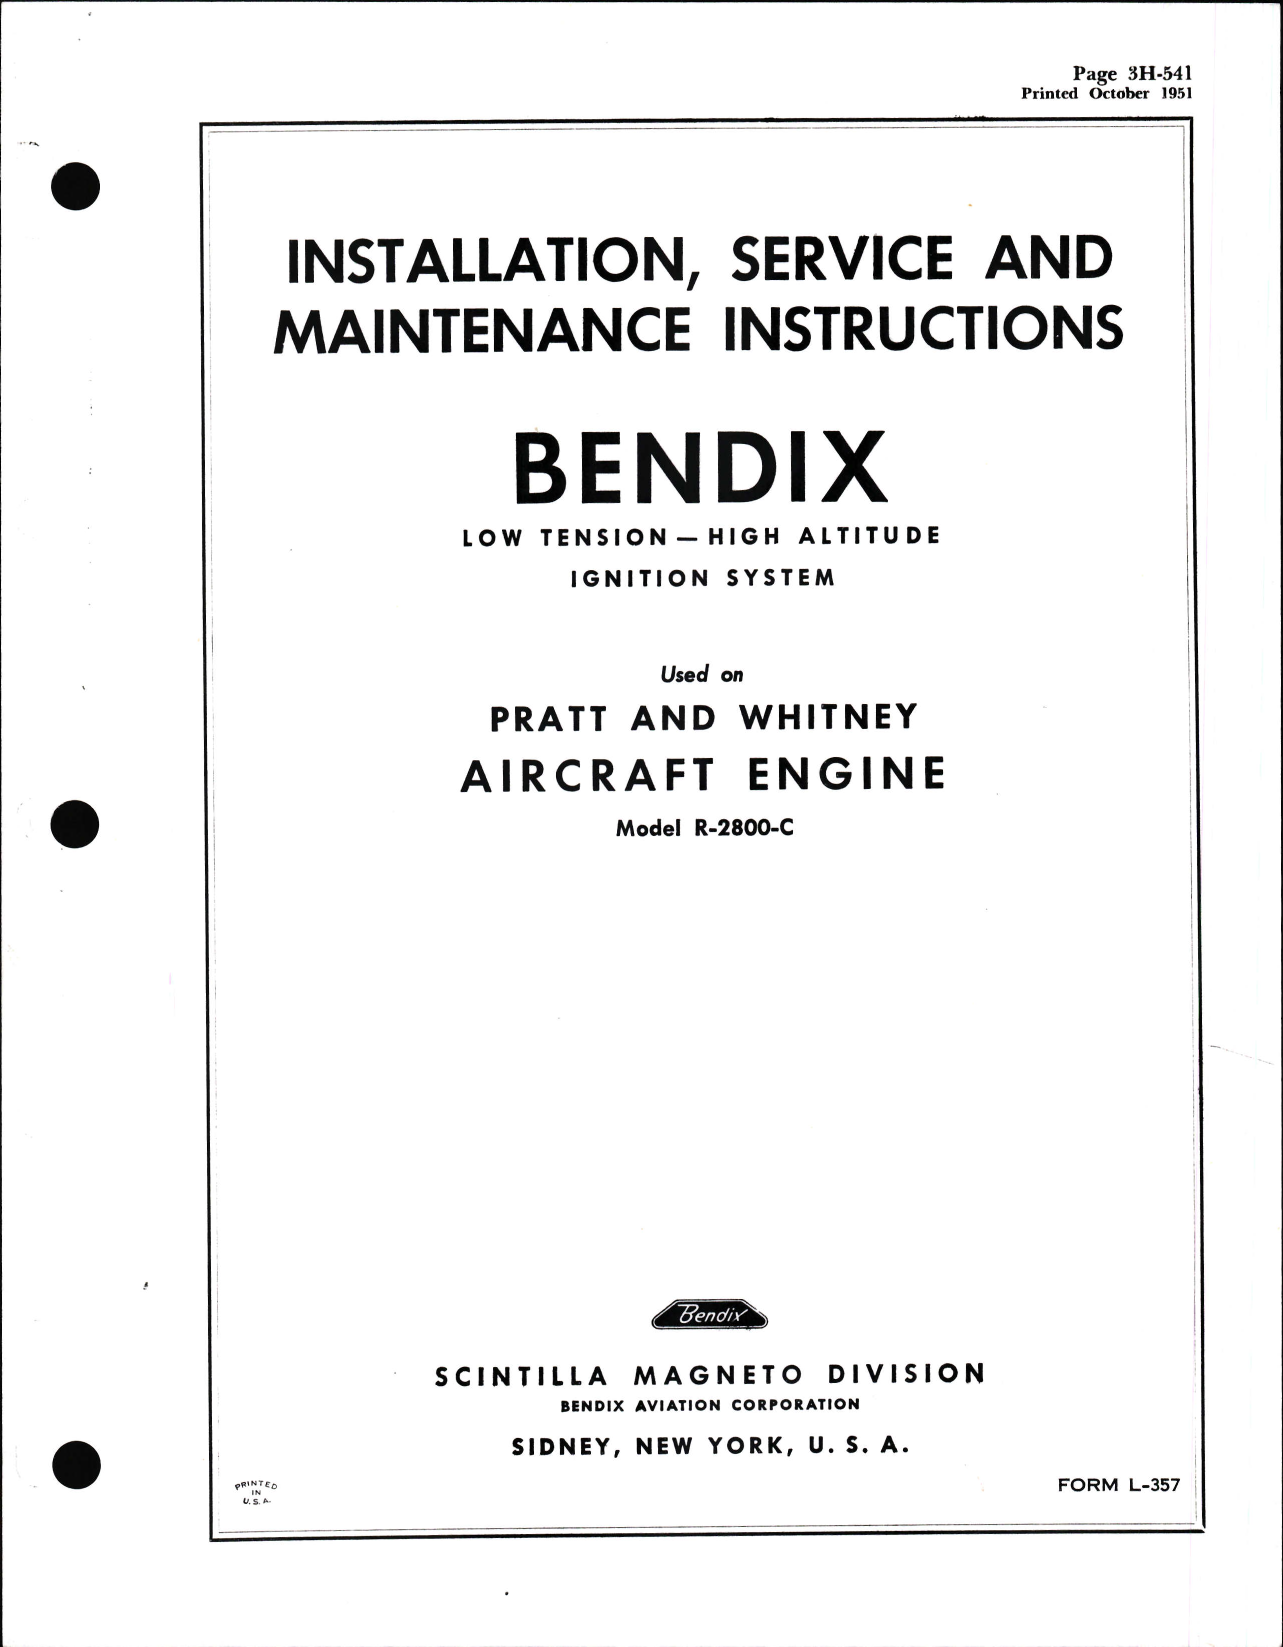 Sample page 1 from AirCorps Library document: Installation, Service, & Maintenance Instructions for Bendix Low Tension - High Altitude Ignition